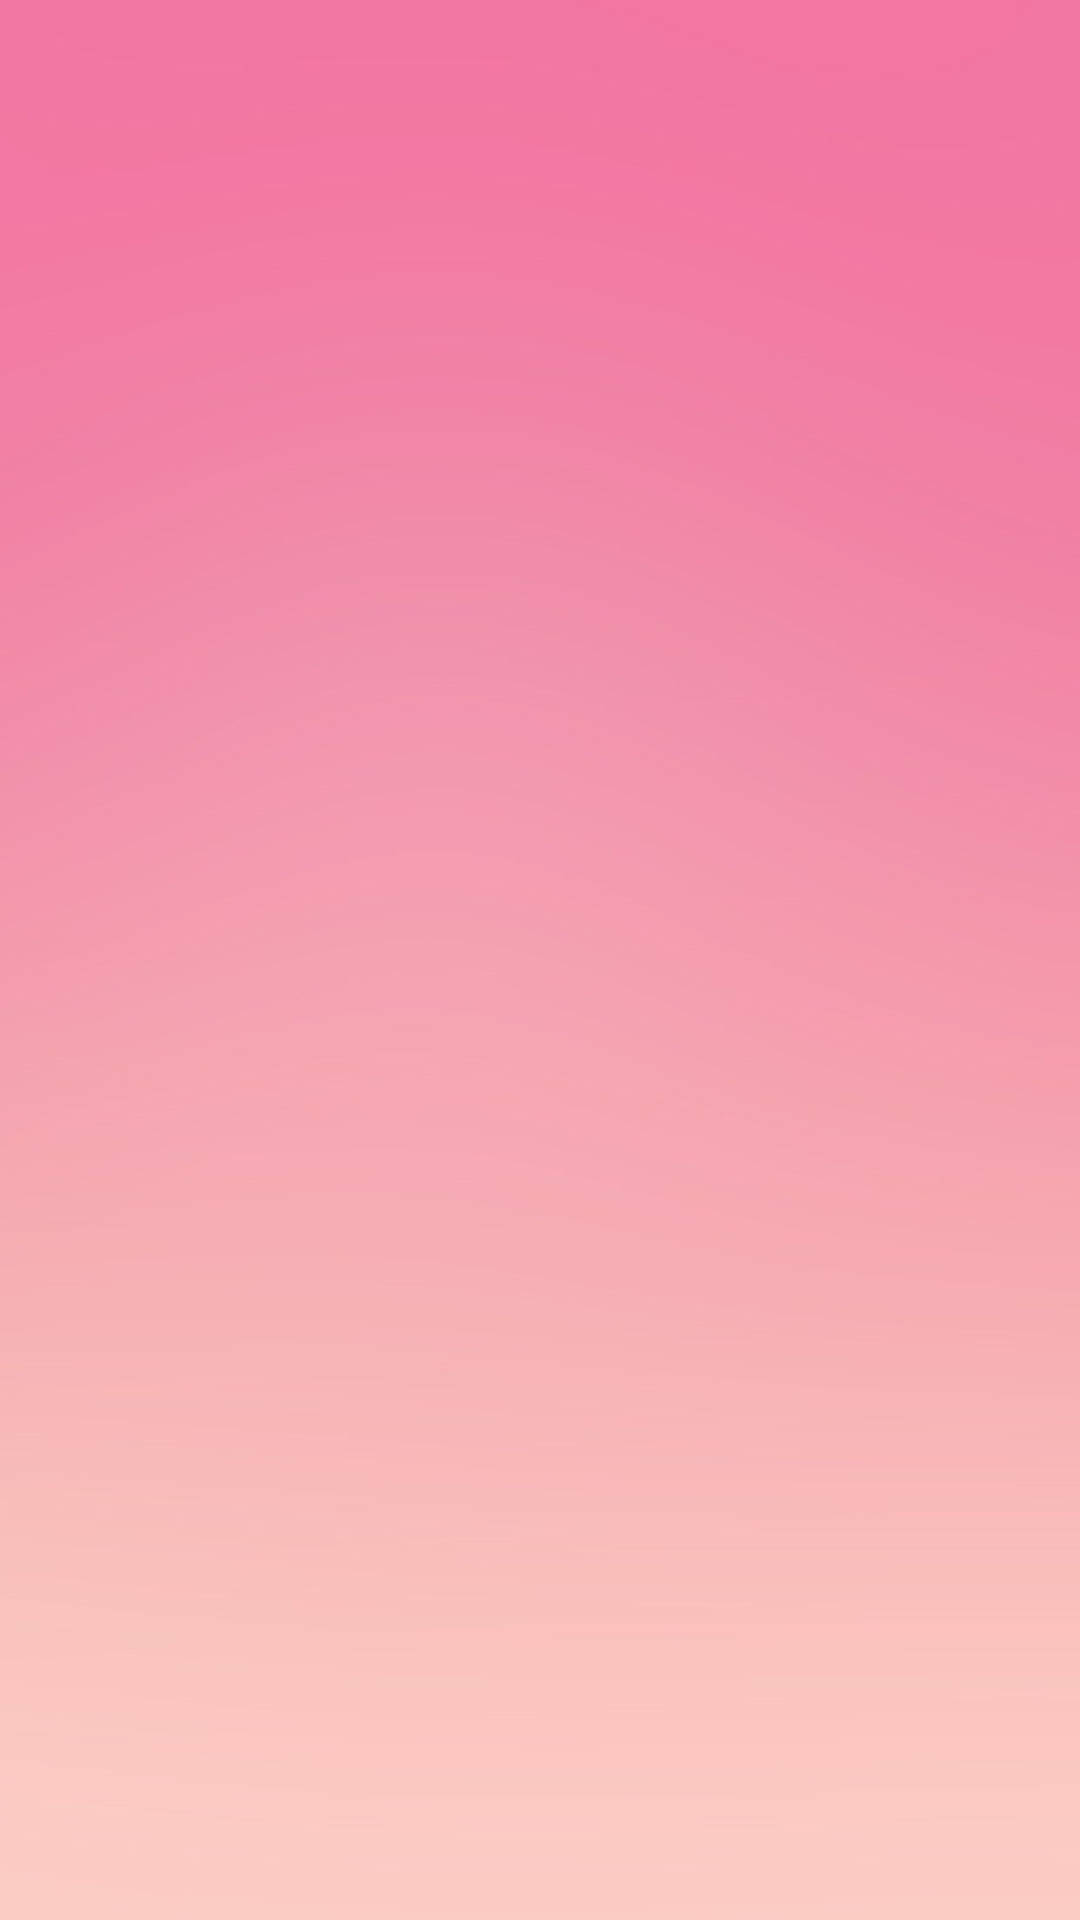 Hot Pink And Peach Gradient Background